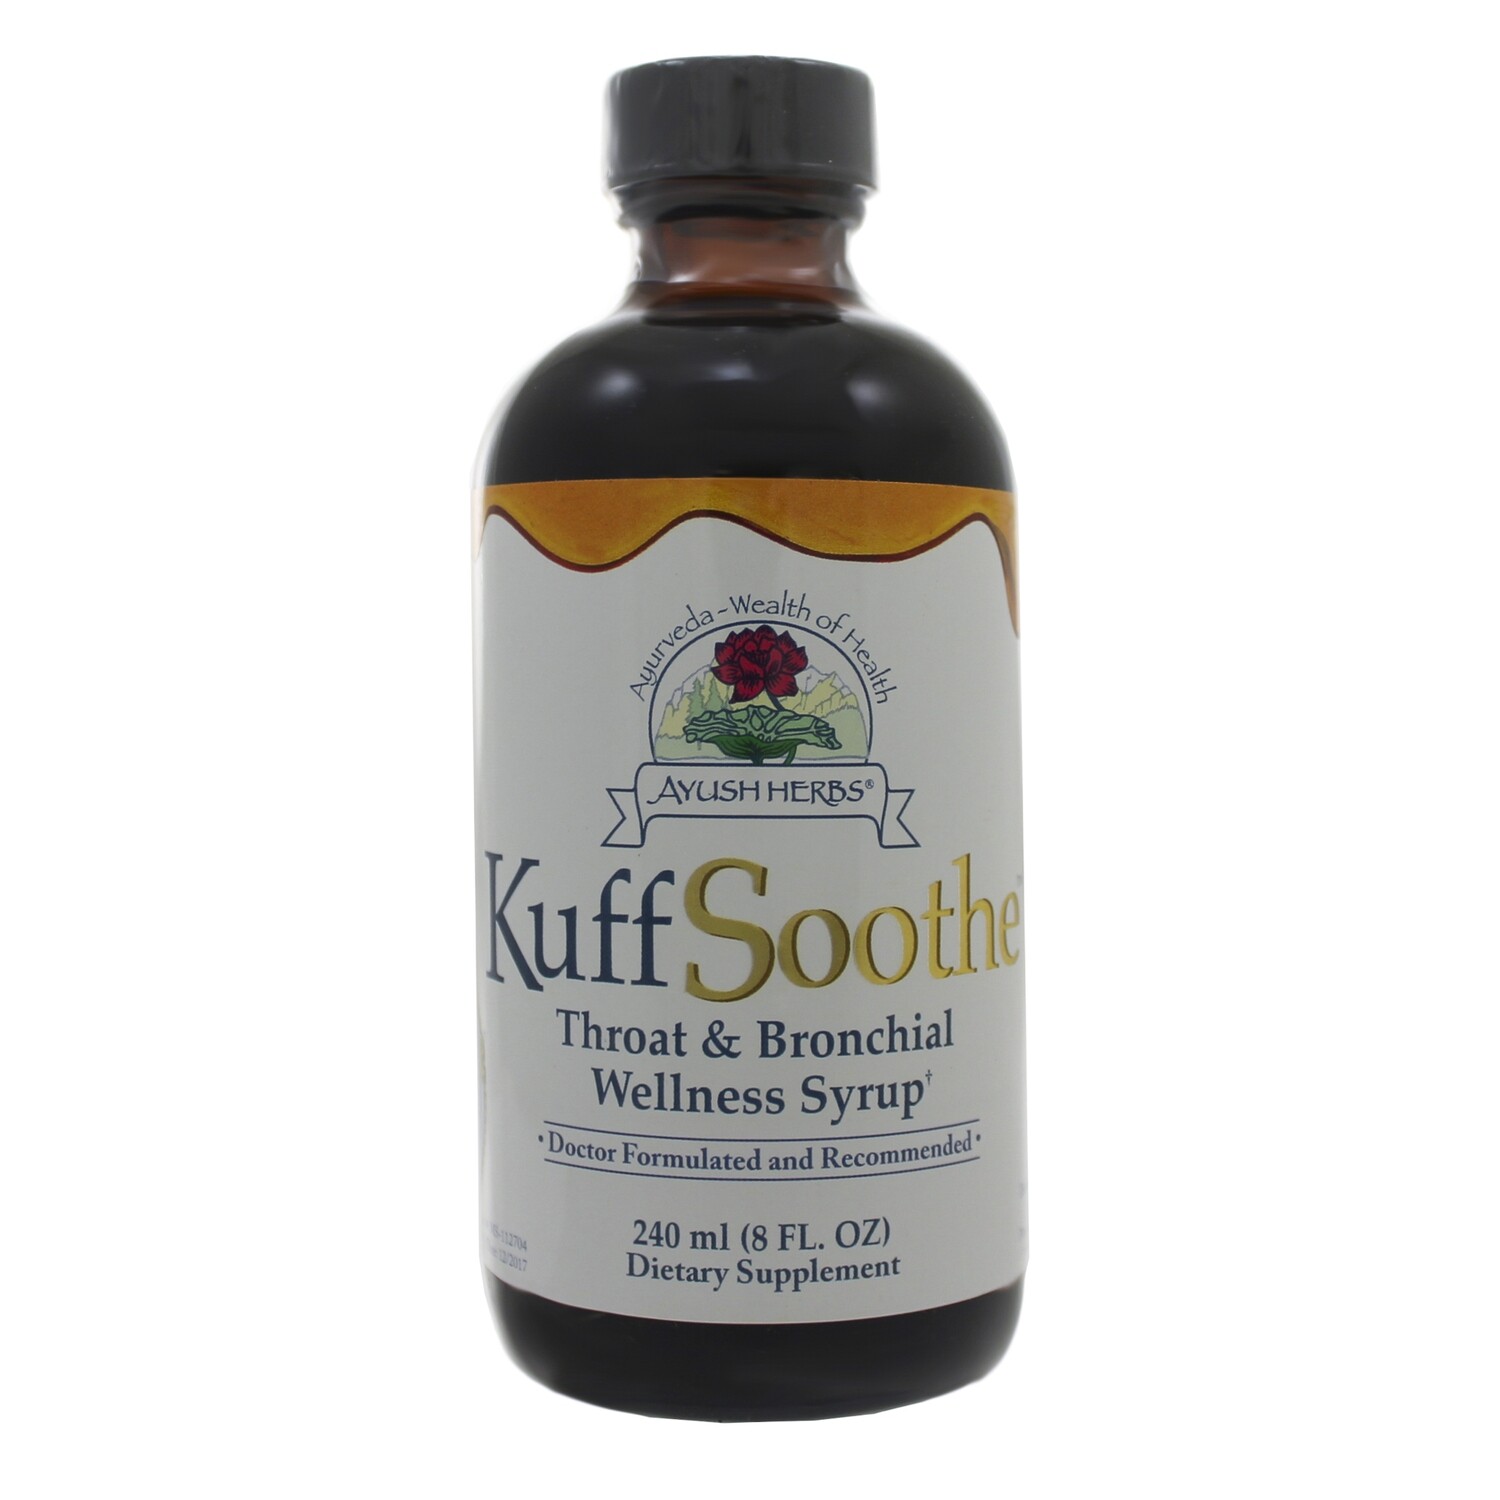 KuffSoothe Throat & Bronchial Wellness Syrup 8oz